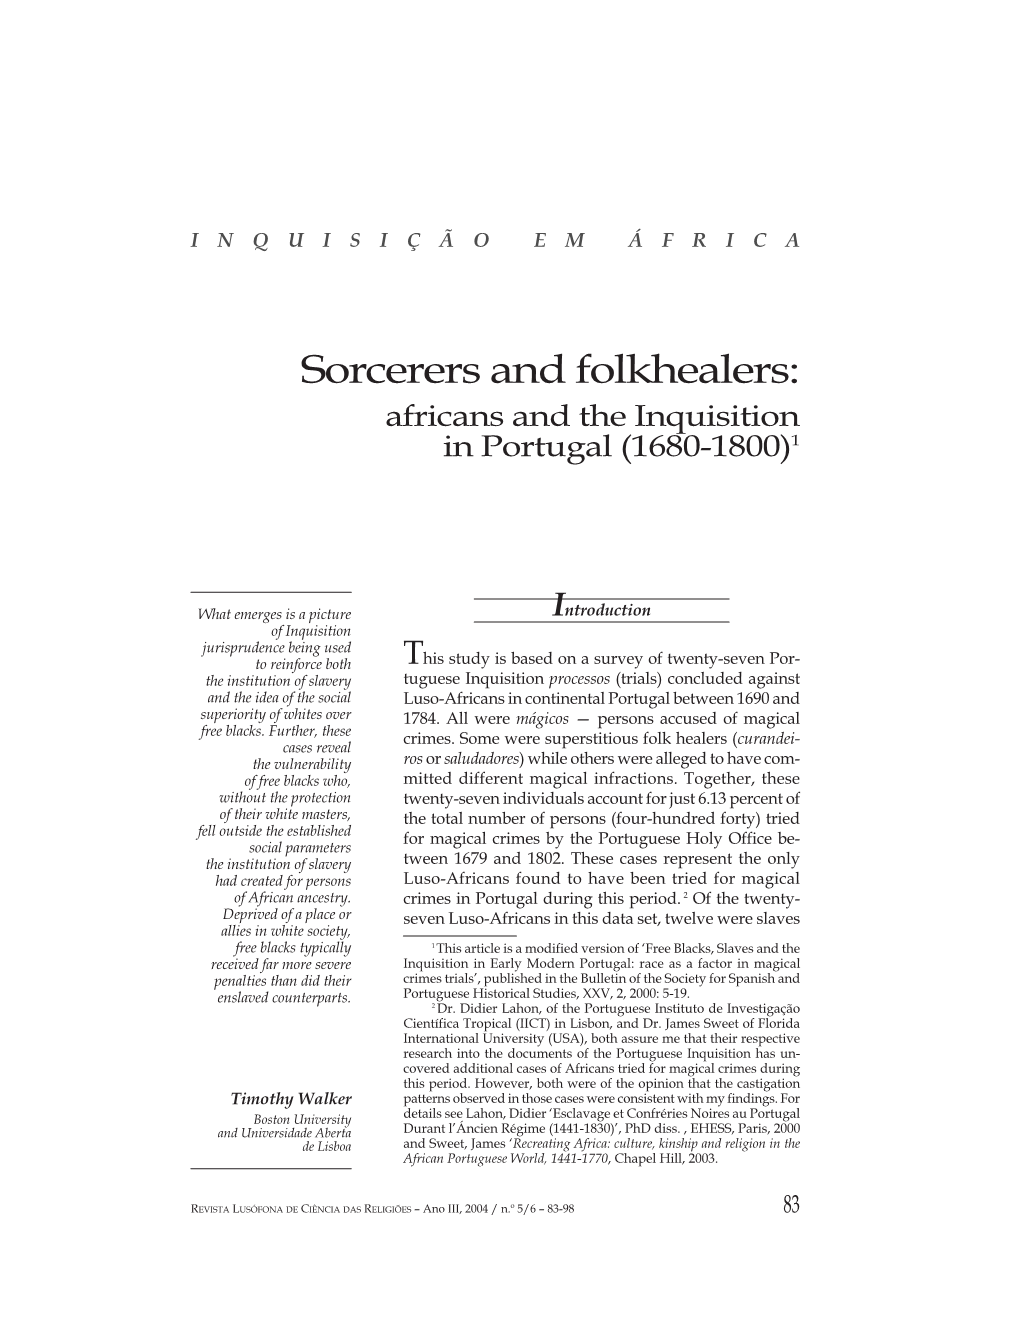 Sorcerers and Folkhealers: Africans and the Inquisition in Portugal (1680-1800)1